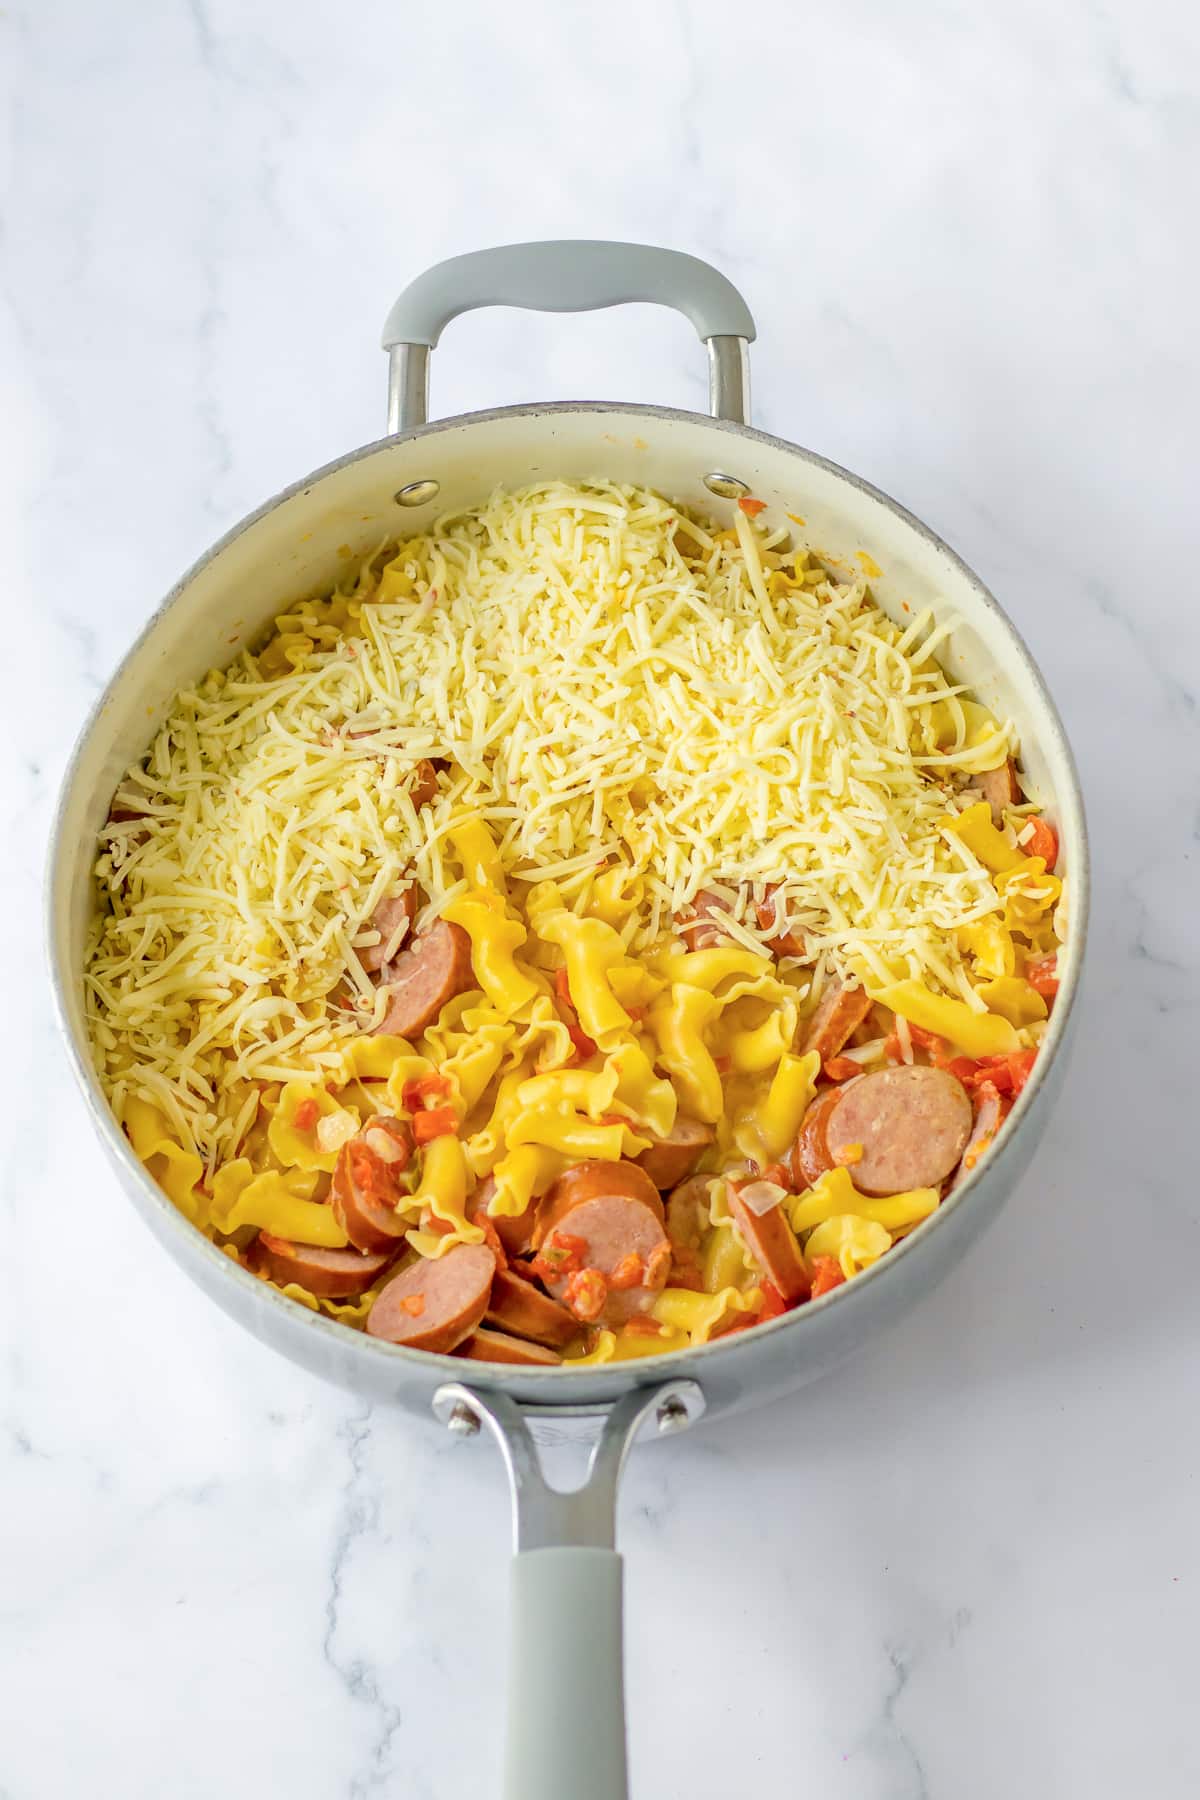 A skillet full of smoked sausage and pasta in a creamy sauce being covered with shredded cheese.